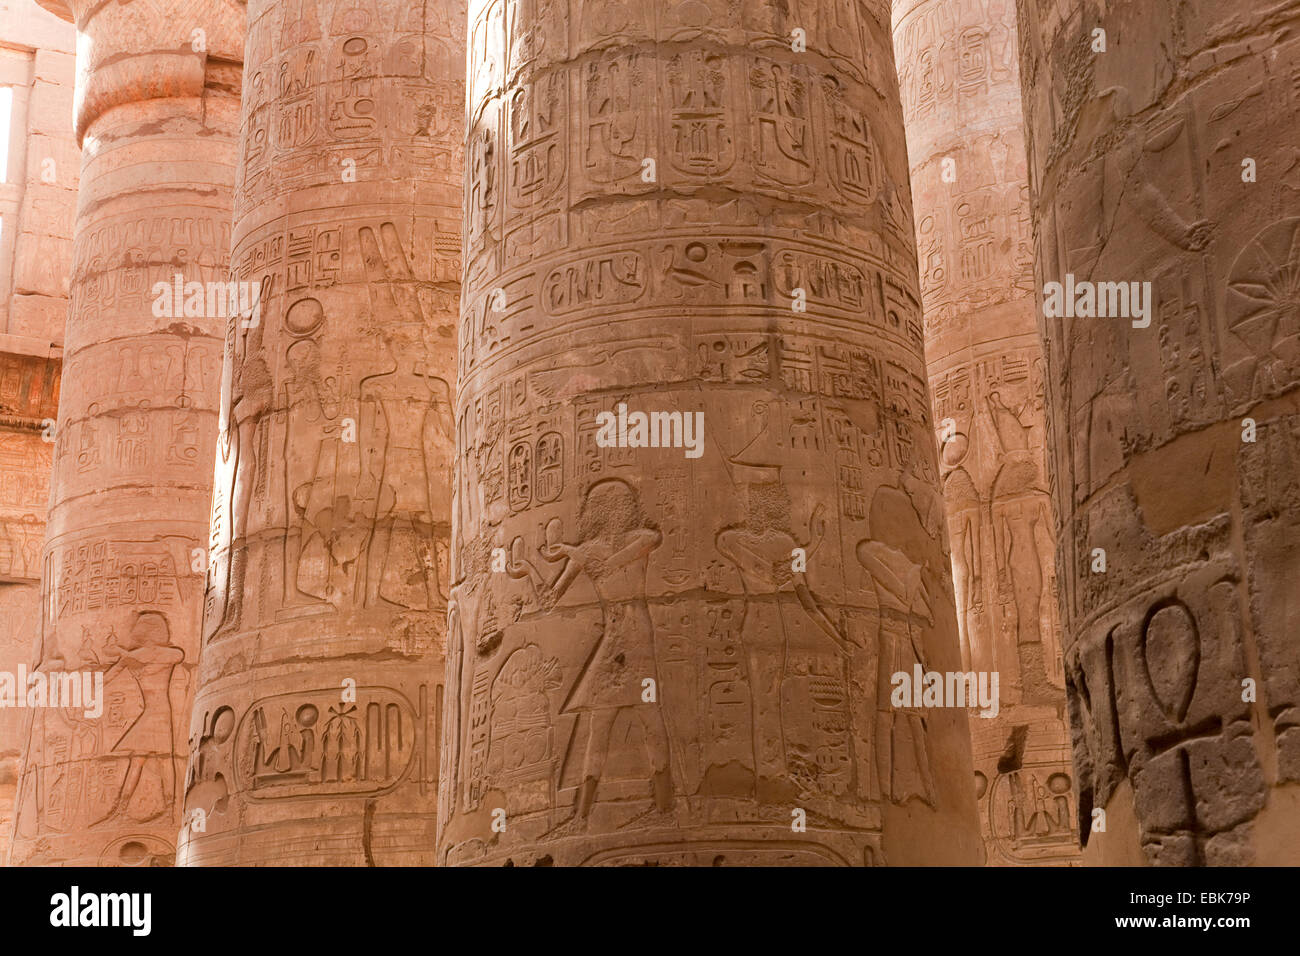 some of the 134 pillars onamented with reliefs in the great hall of the Precinct of Amun-Re, Egypt, Karnak, Luxor Stock Photo